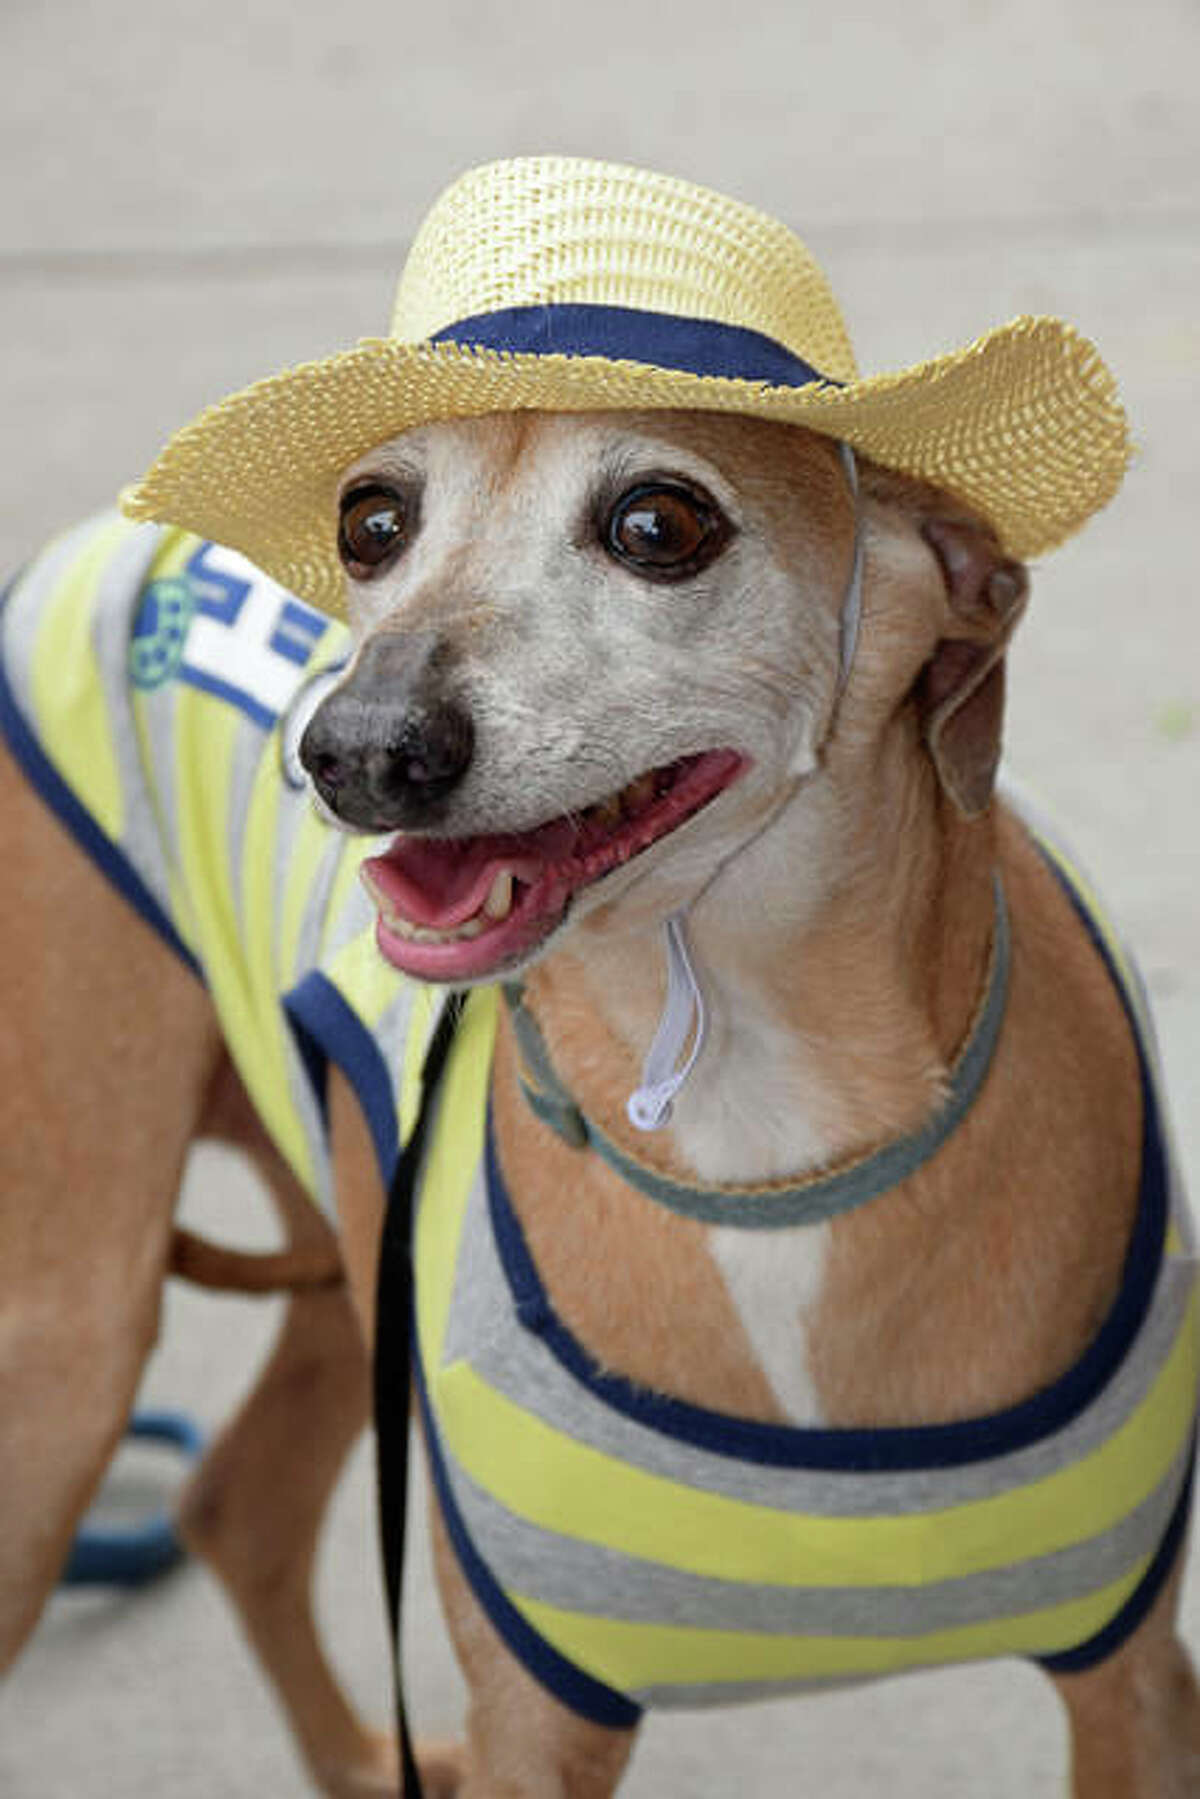 Cosmo, an Italian Greyhound owned by Samantha Carlisle of Alton, is ready to meet new friends on Saturday.